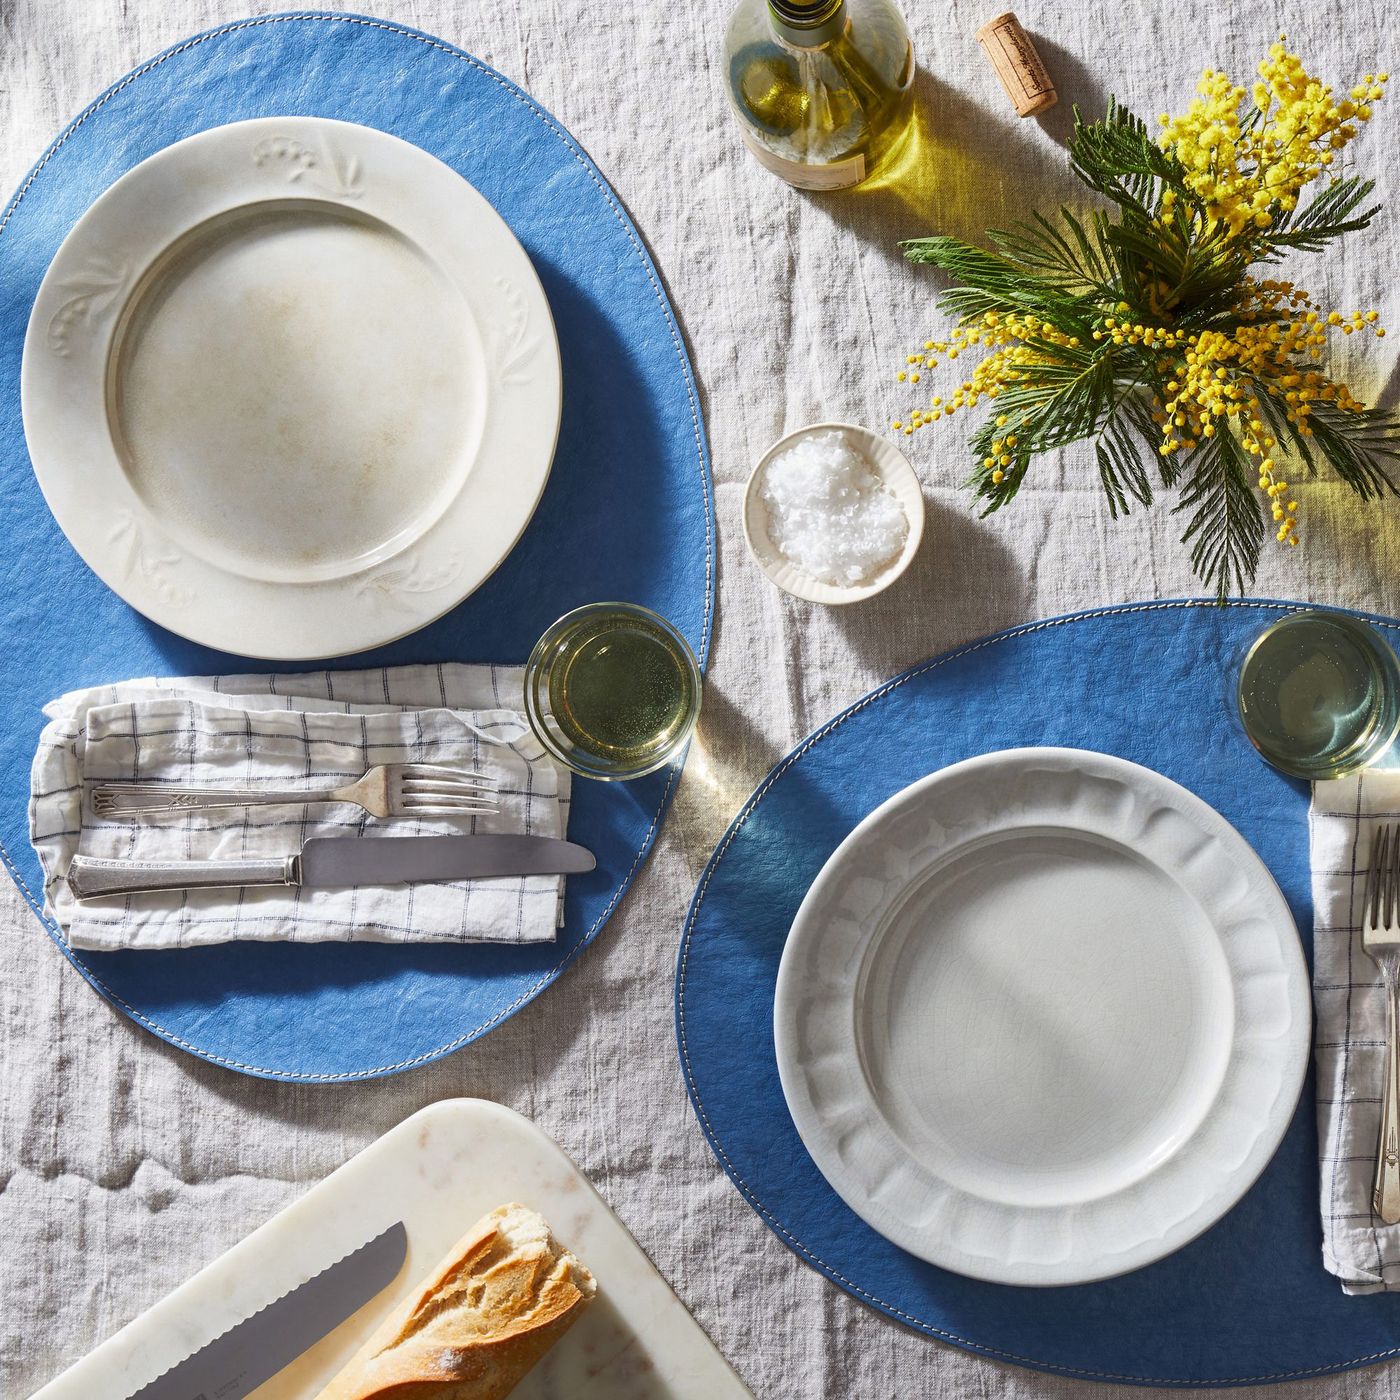 13 Best Placemats for Everyday Use